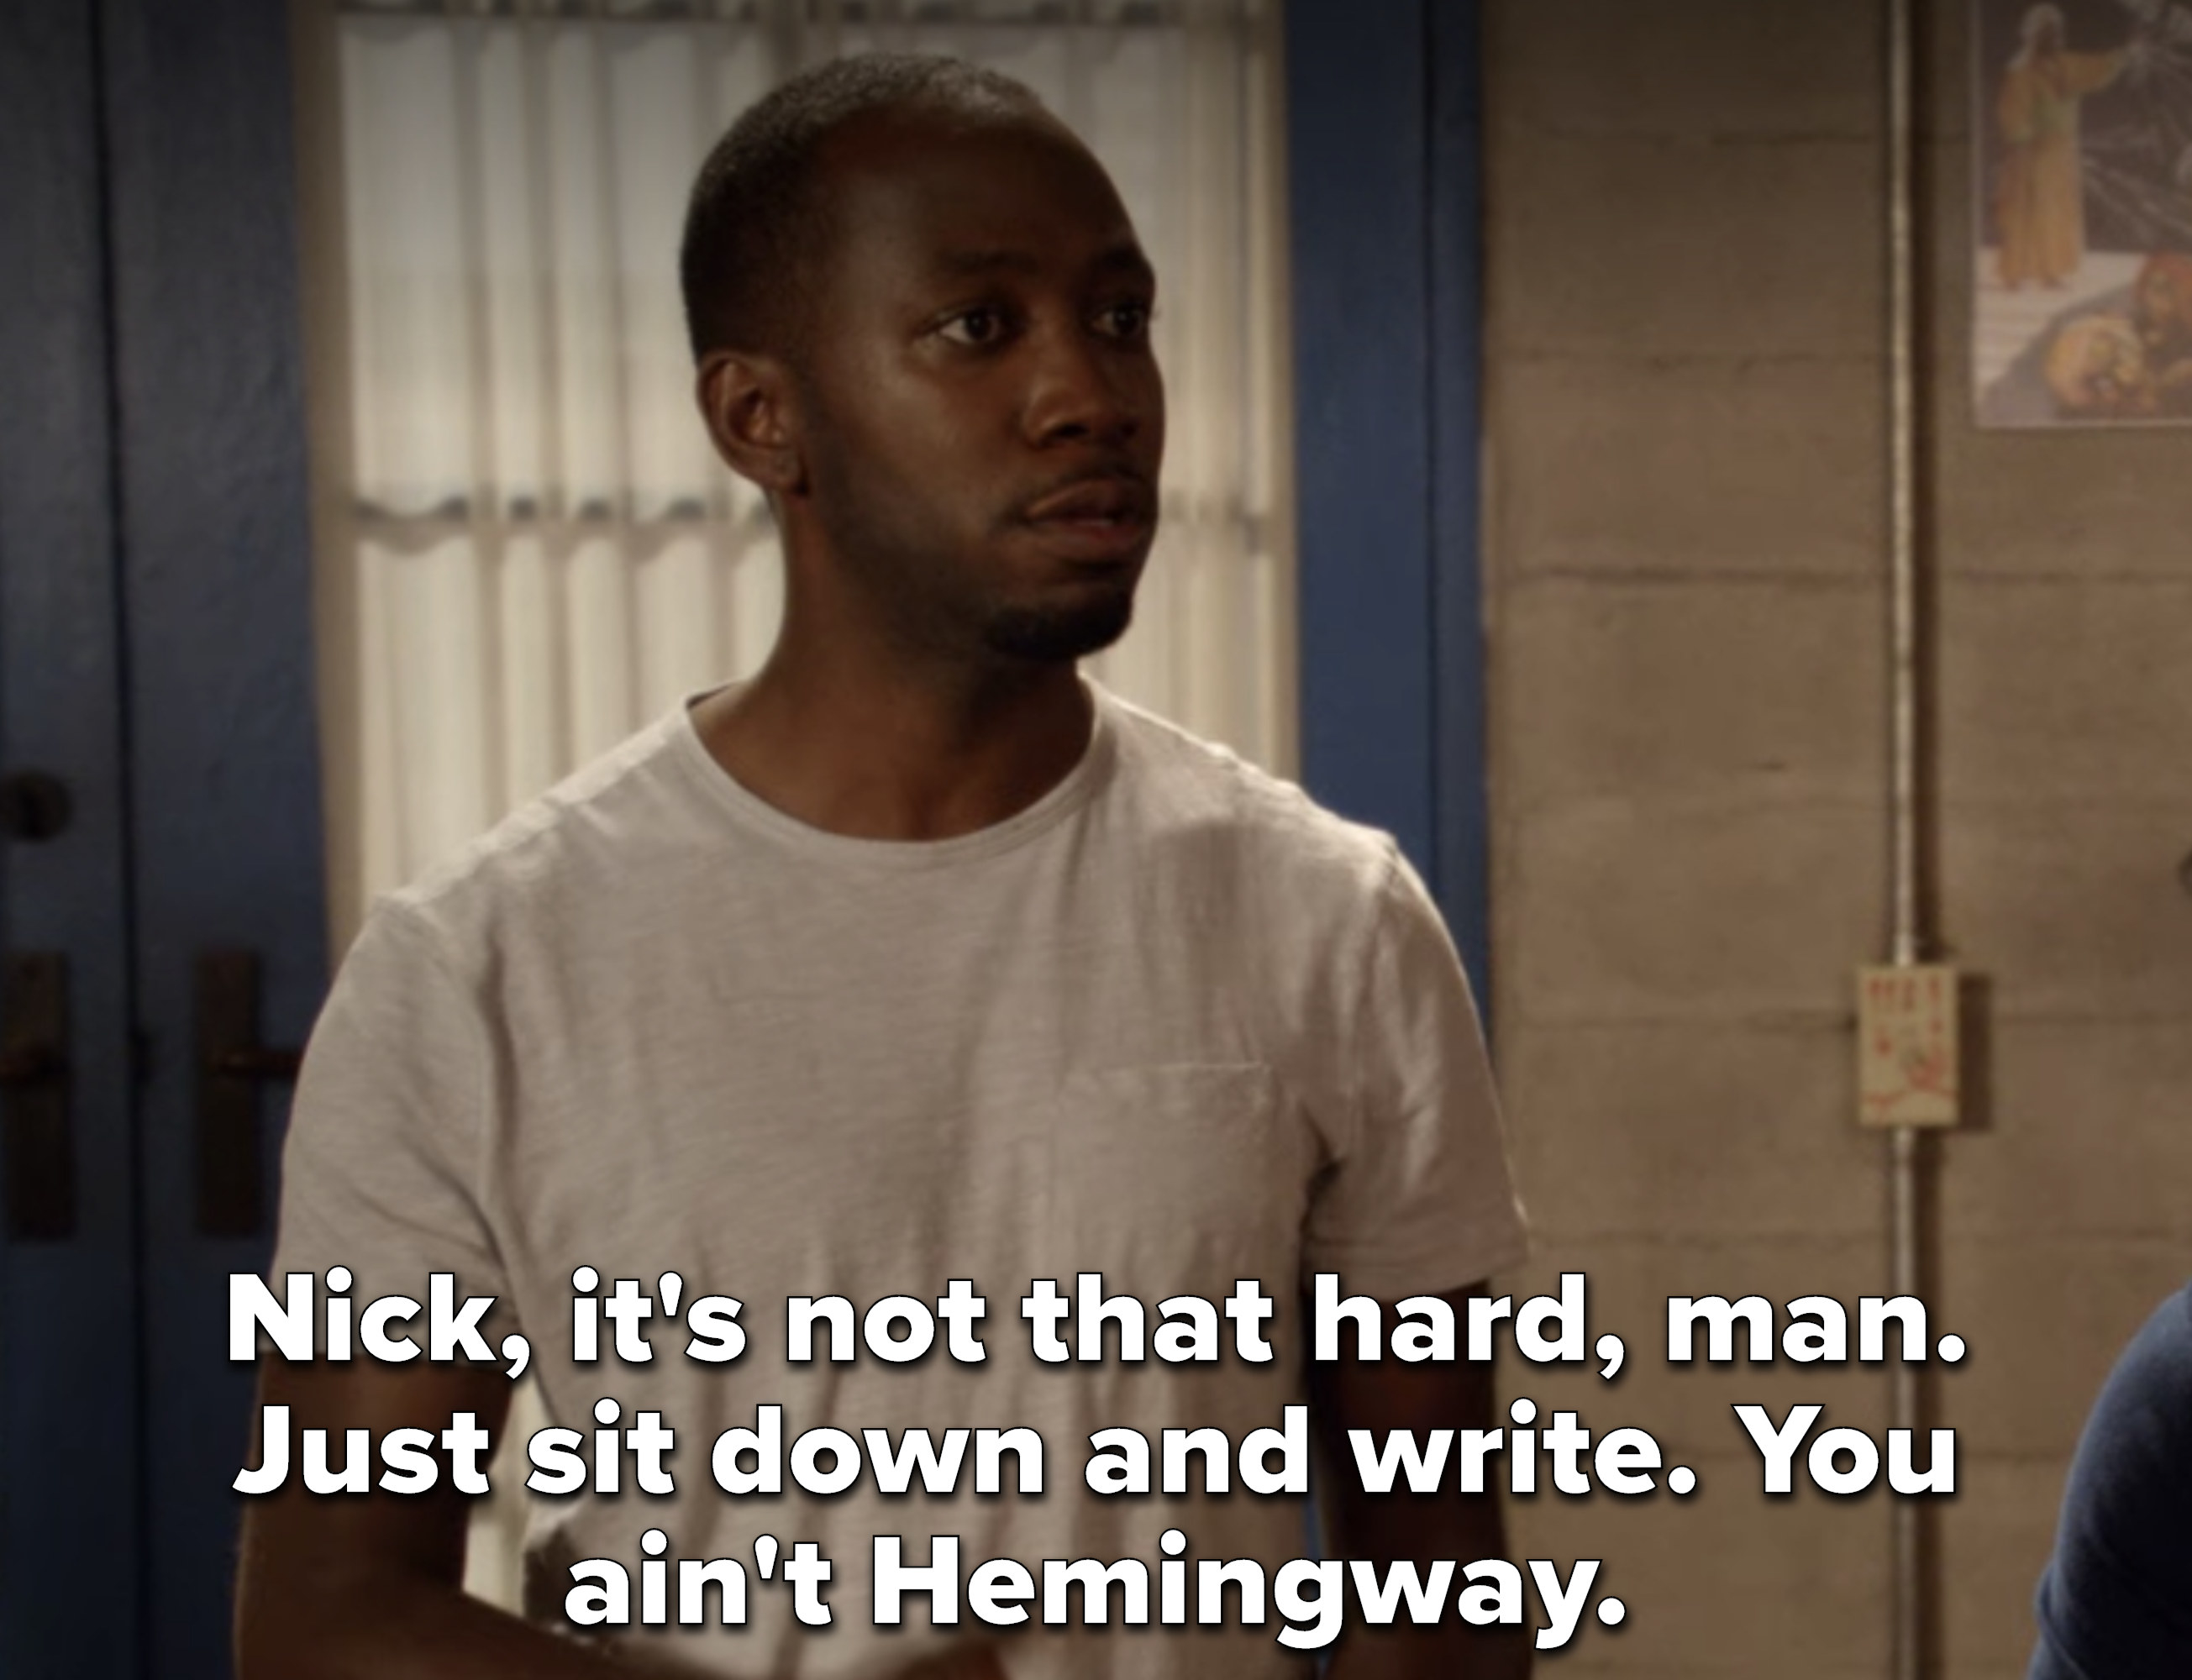 Winston telling Nick, &quot;Nick, it&#x27;s not that hard, man. Just sit down and write. You ain&#x27;t Hemingway&quot;